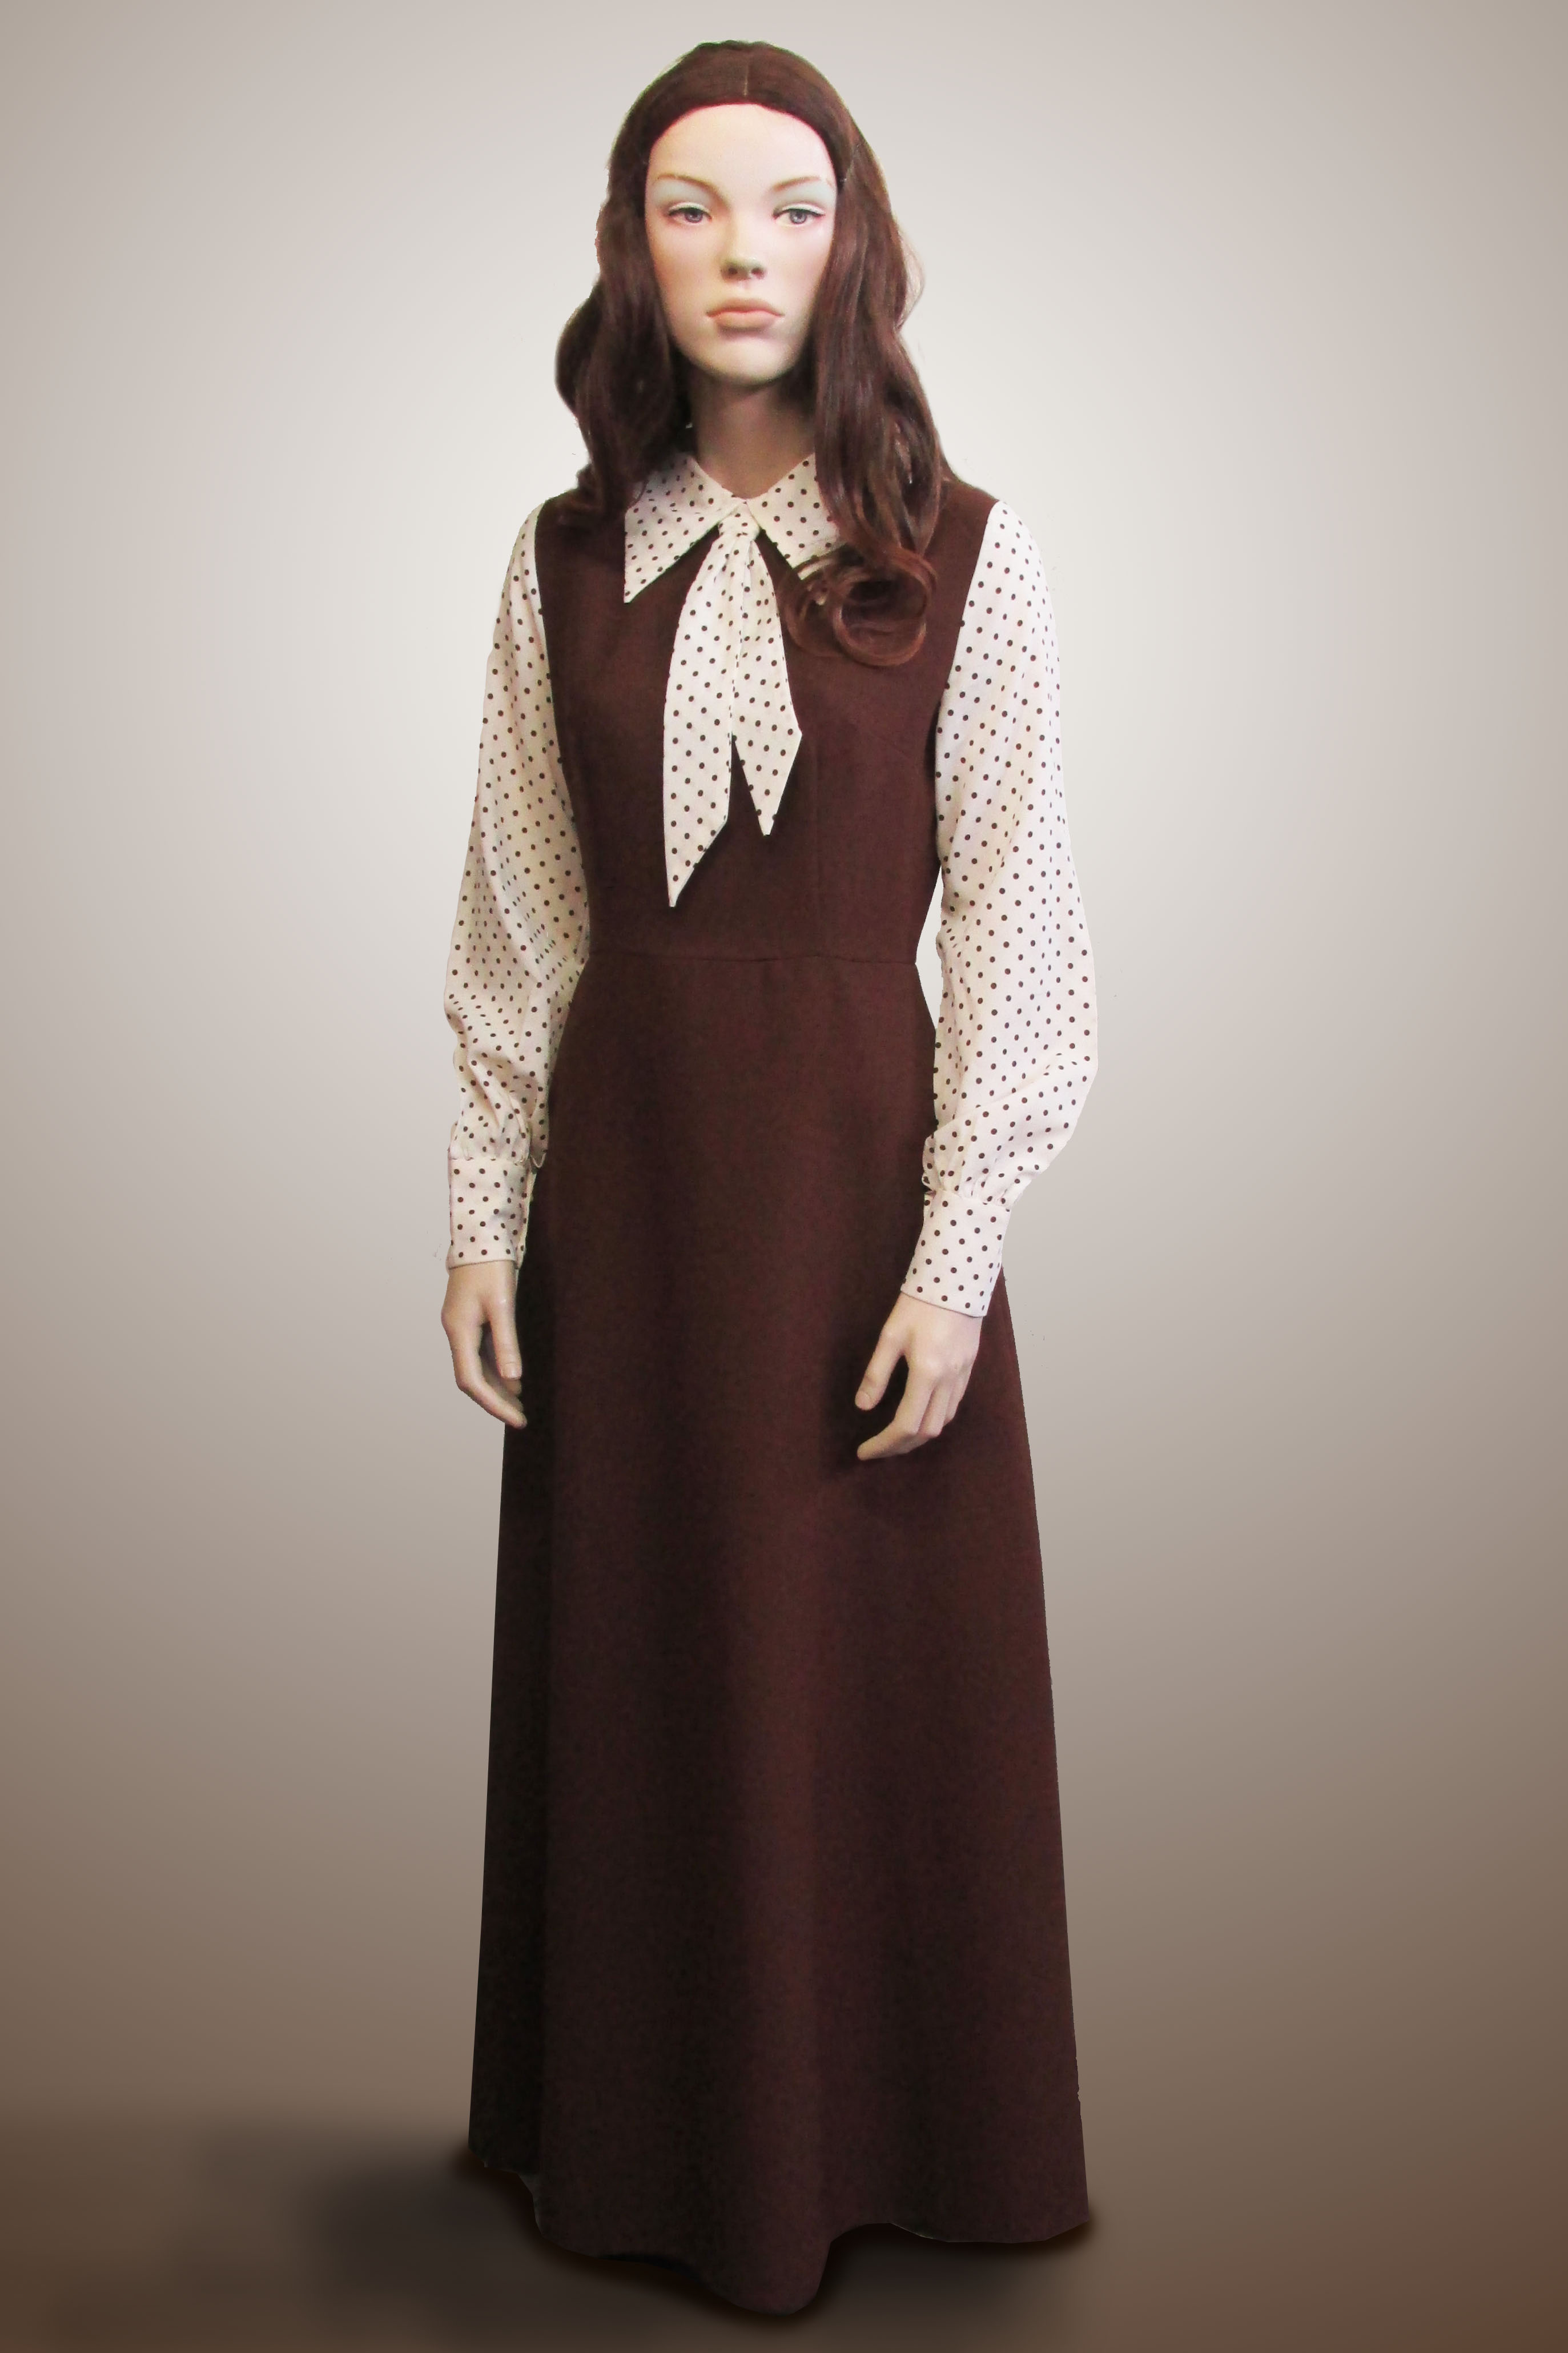 Dress Long Brown with White with Spots Sleeve 1970s